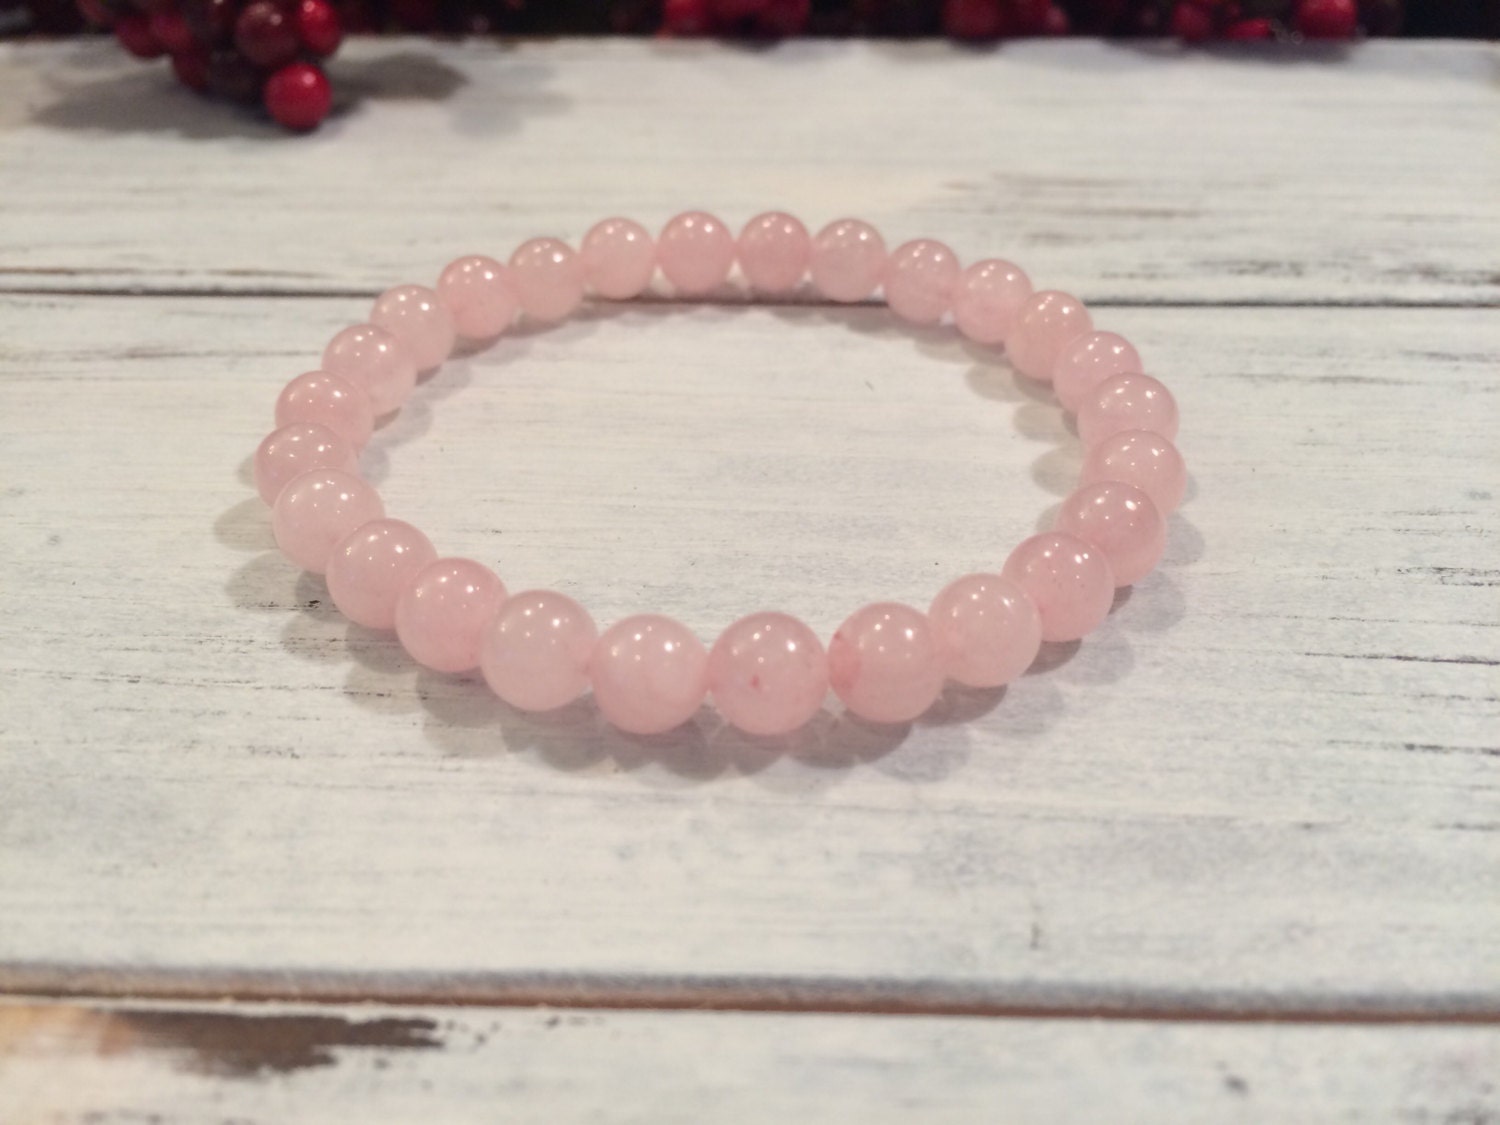 Beads with Bead Pen Kit - Rose Quartz and Awareness Charm with